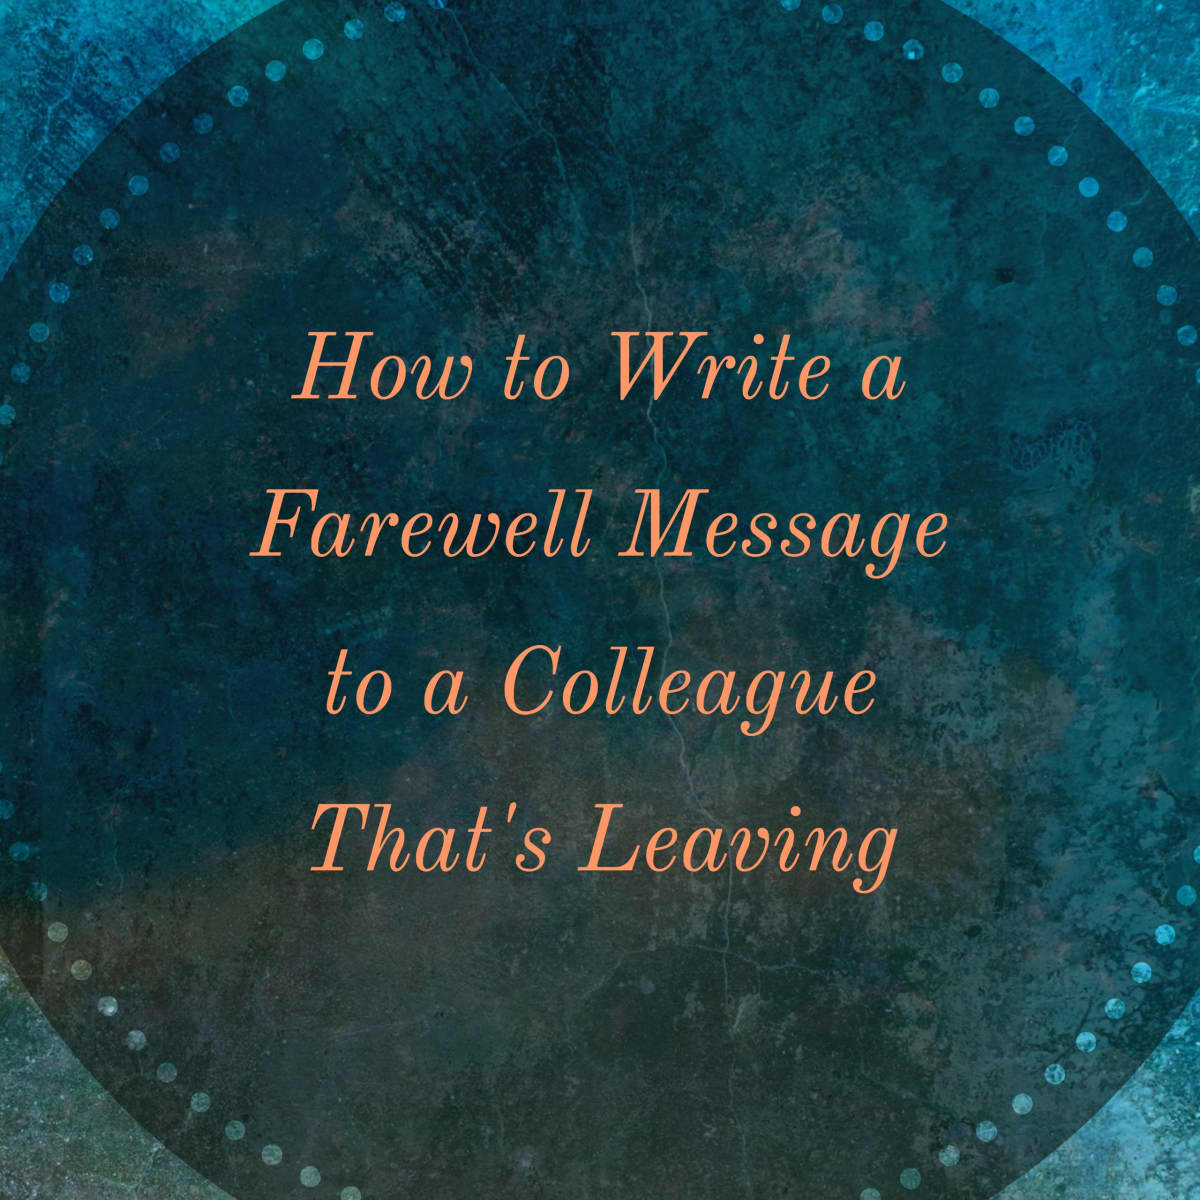 60+ Best Farewell Messages for Colleagues or Coworkers - ToughNickel